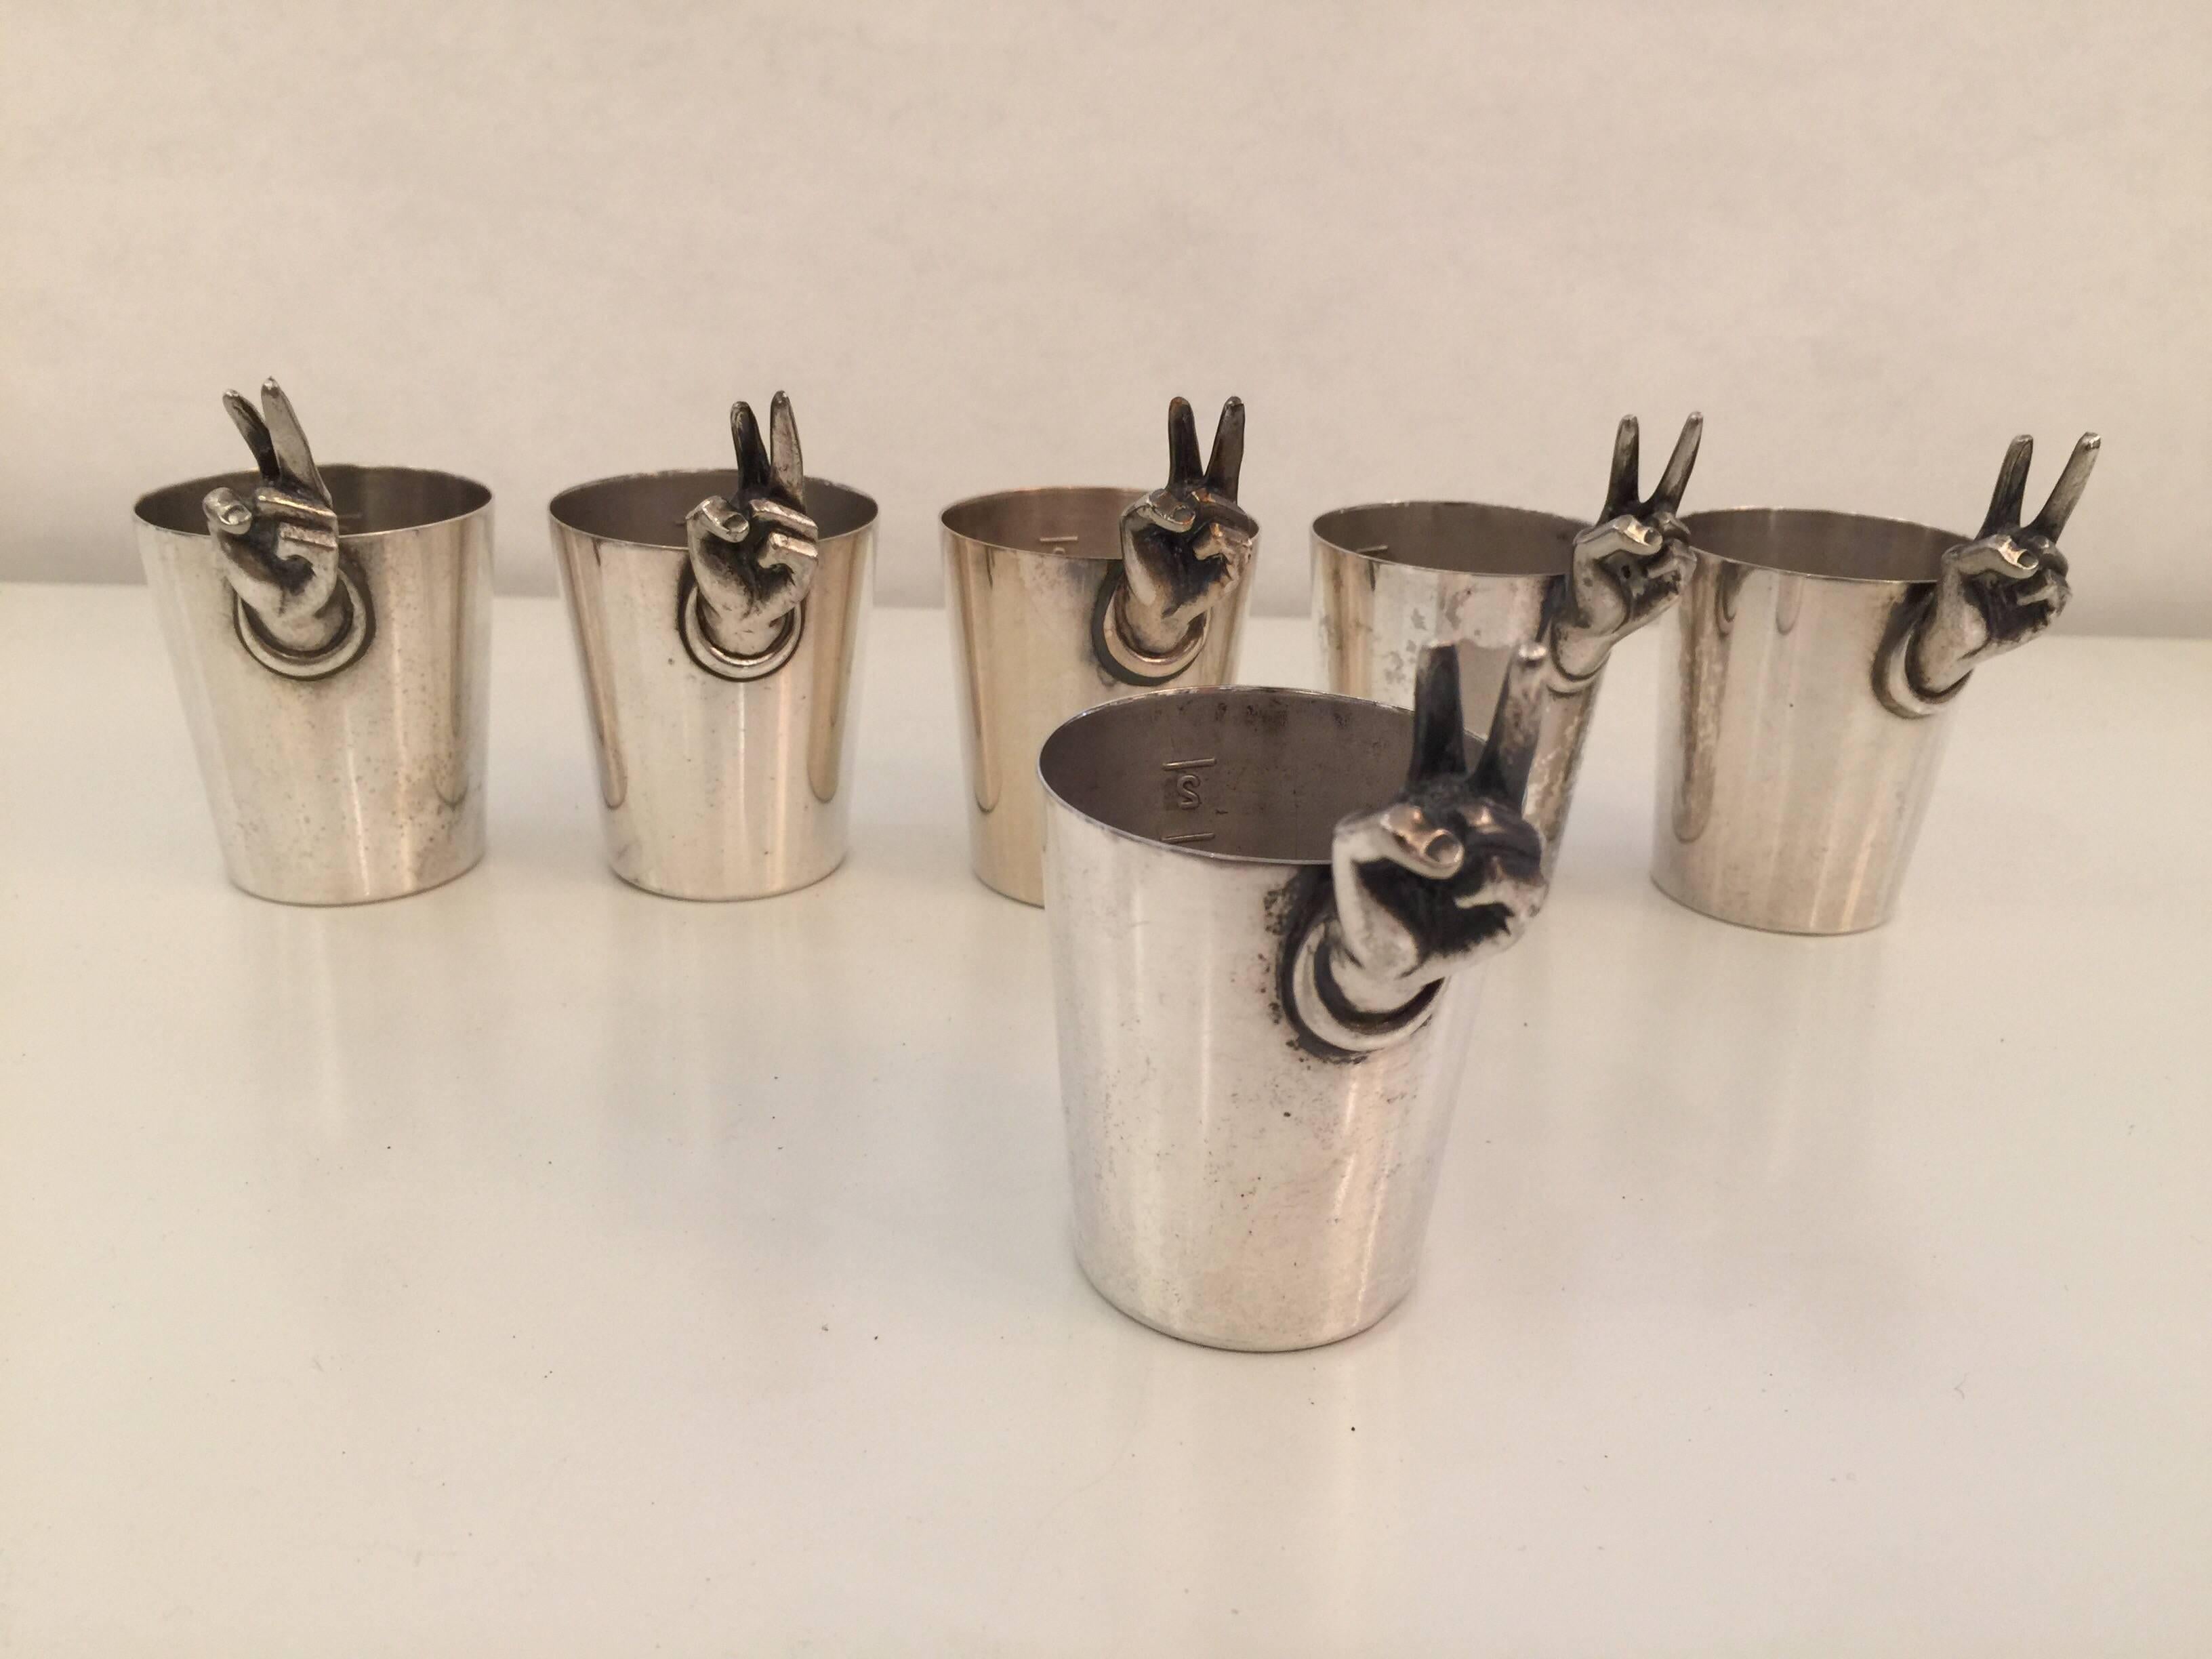 This is a rare and whimsical set of six shot glasses with 